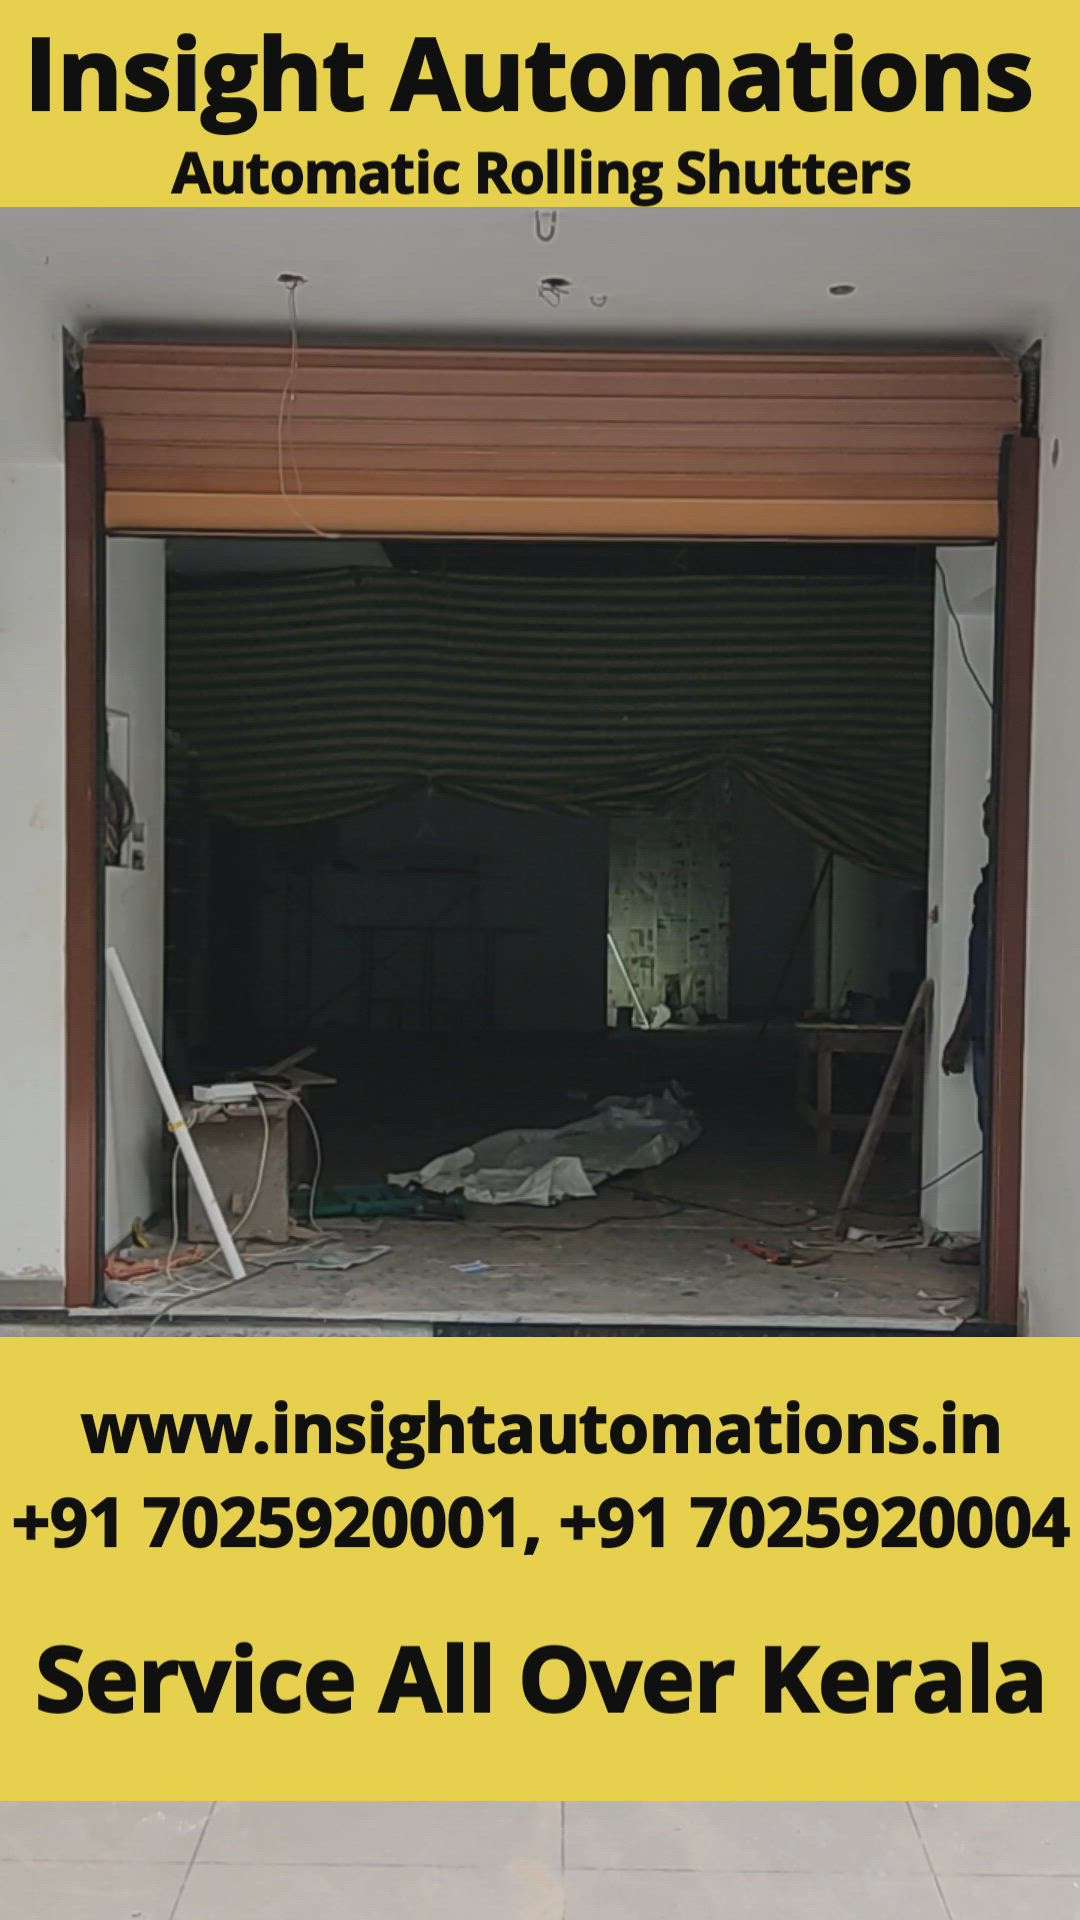 Automatic Rolling shutters for homes #insightautomations #RollingShutters #WindowsIdeas #GlassDoors